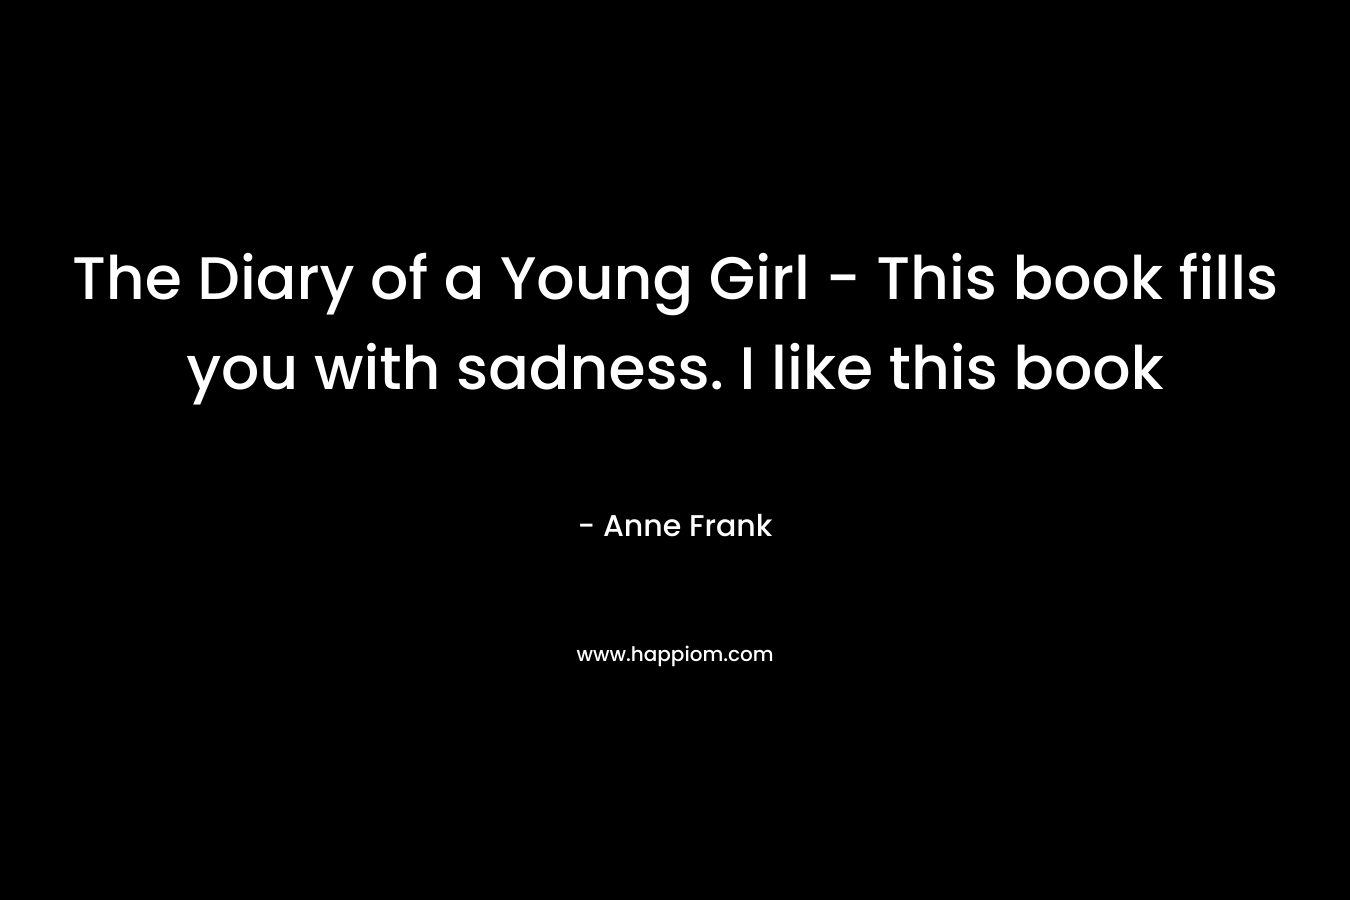 The Diary of a Young Girl - This book fills you with sadness. I like this book